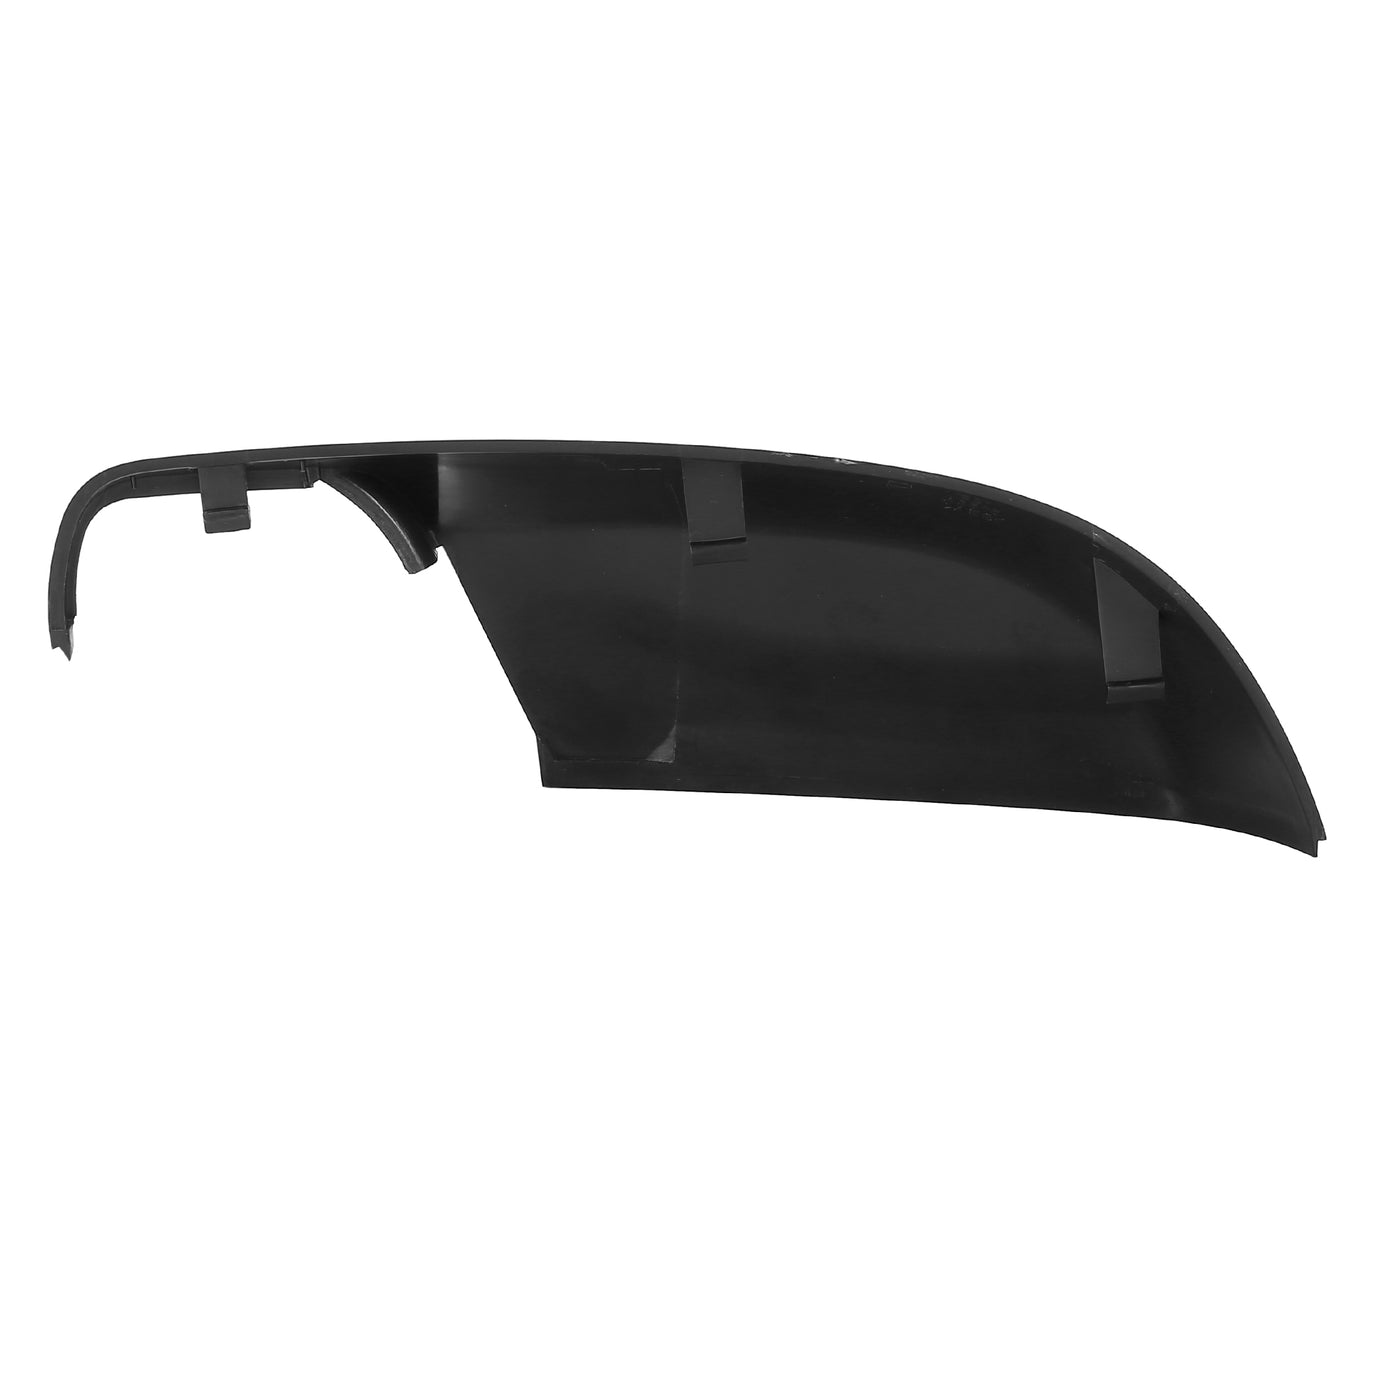 X AUTOHAUX Exterior Right Side Rear View Mirror Lower Cover Cap 91059AJ220 for Subaru Forester 2014-2018